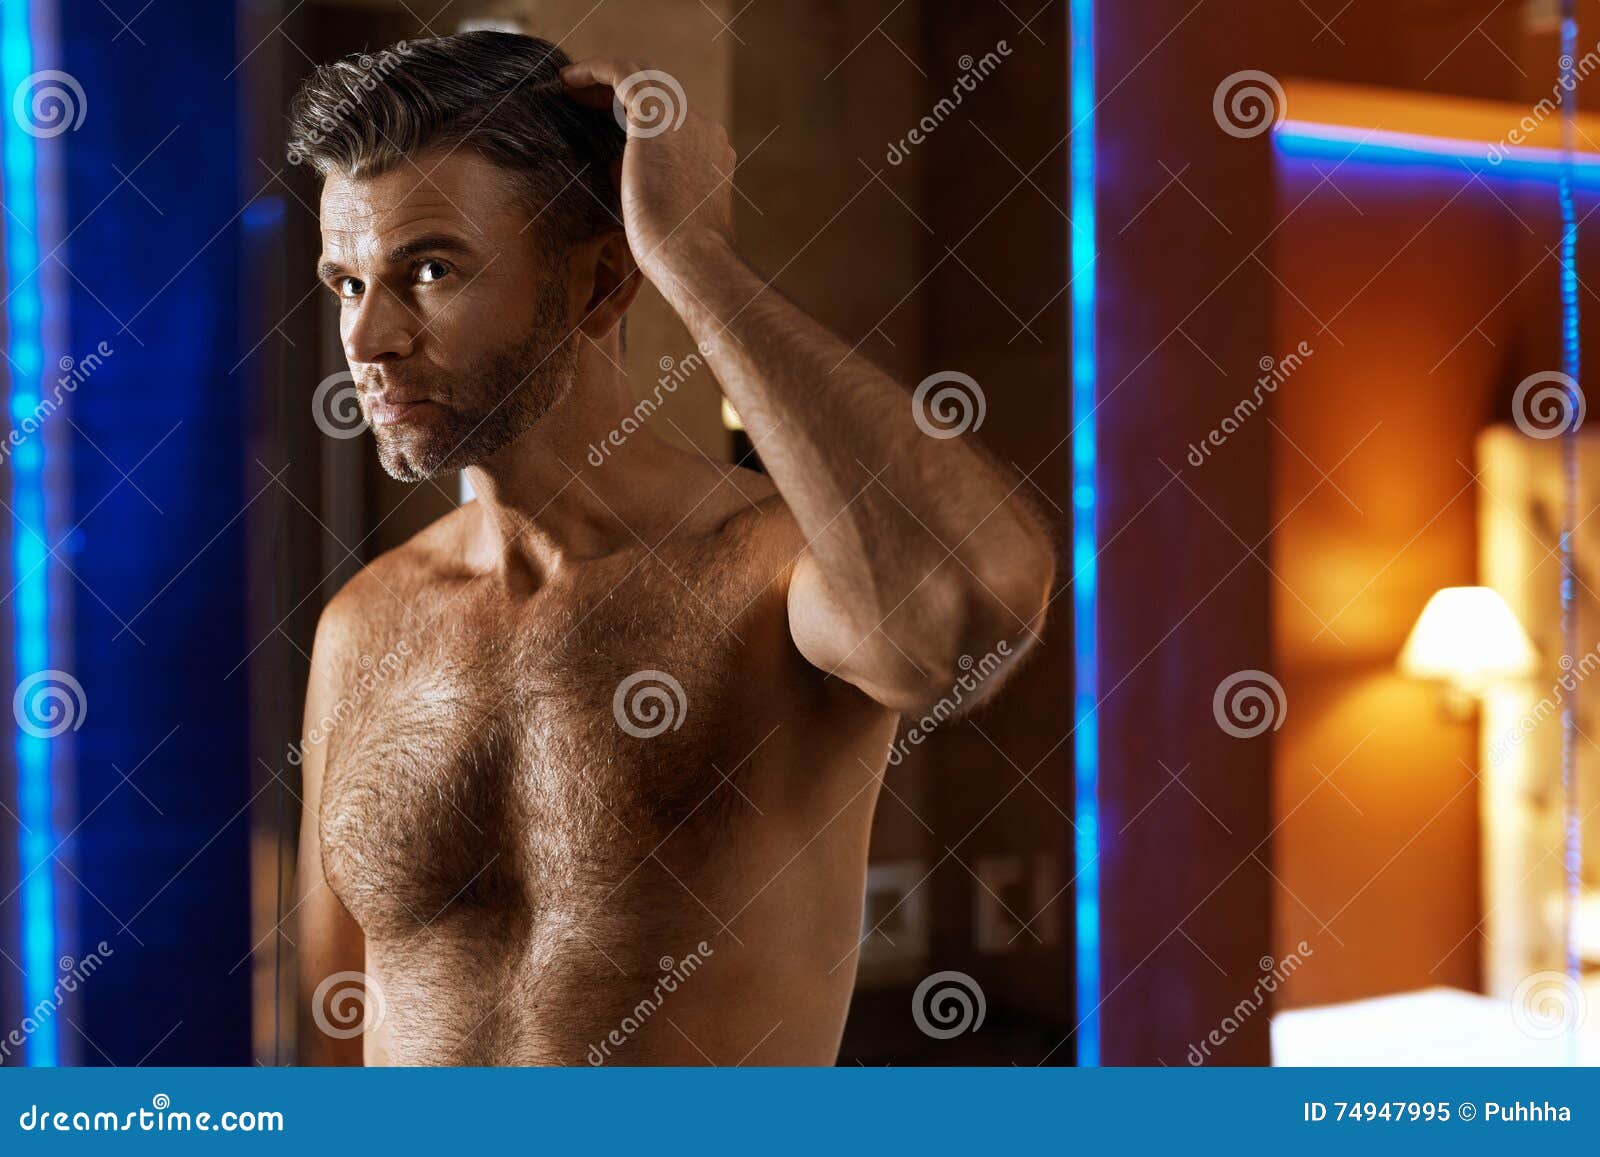 Men Hair Care. Handsome Man Touching His Hair. Men Grooming Stock Image -  Image of head, hygiene: 74947995